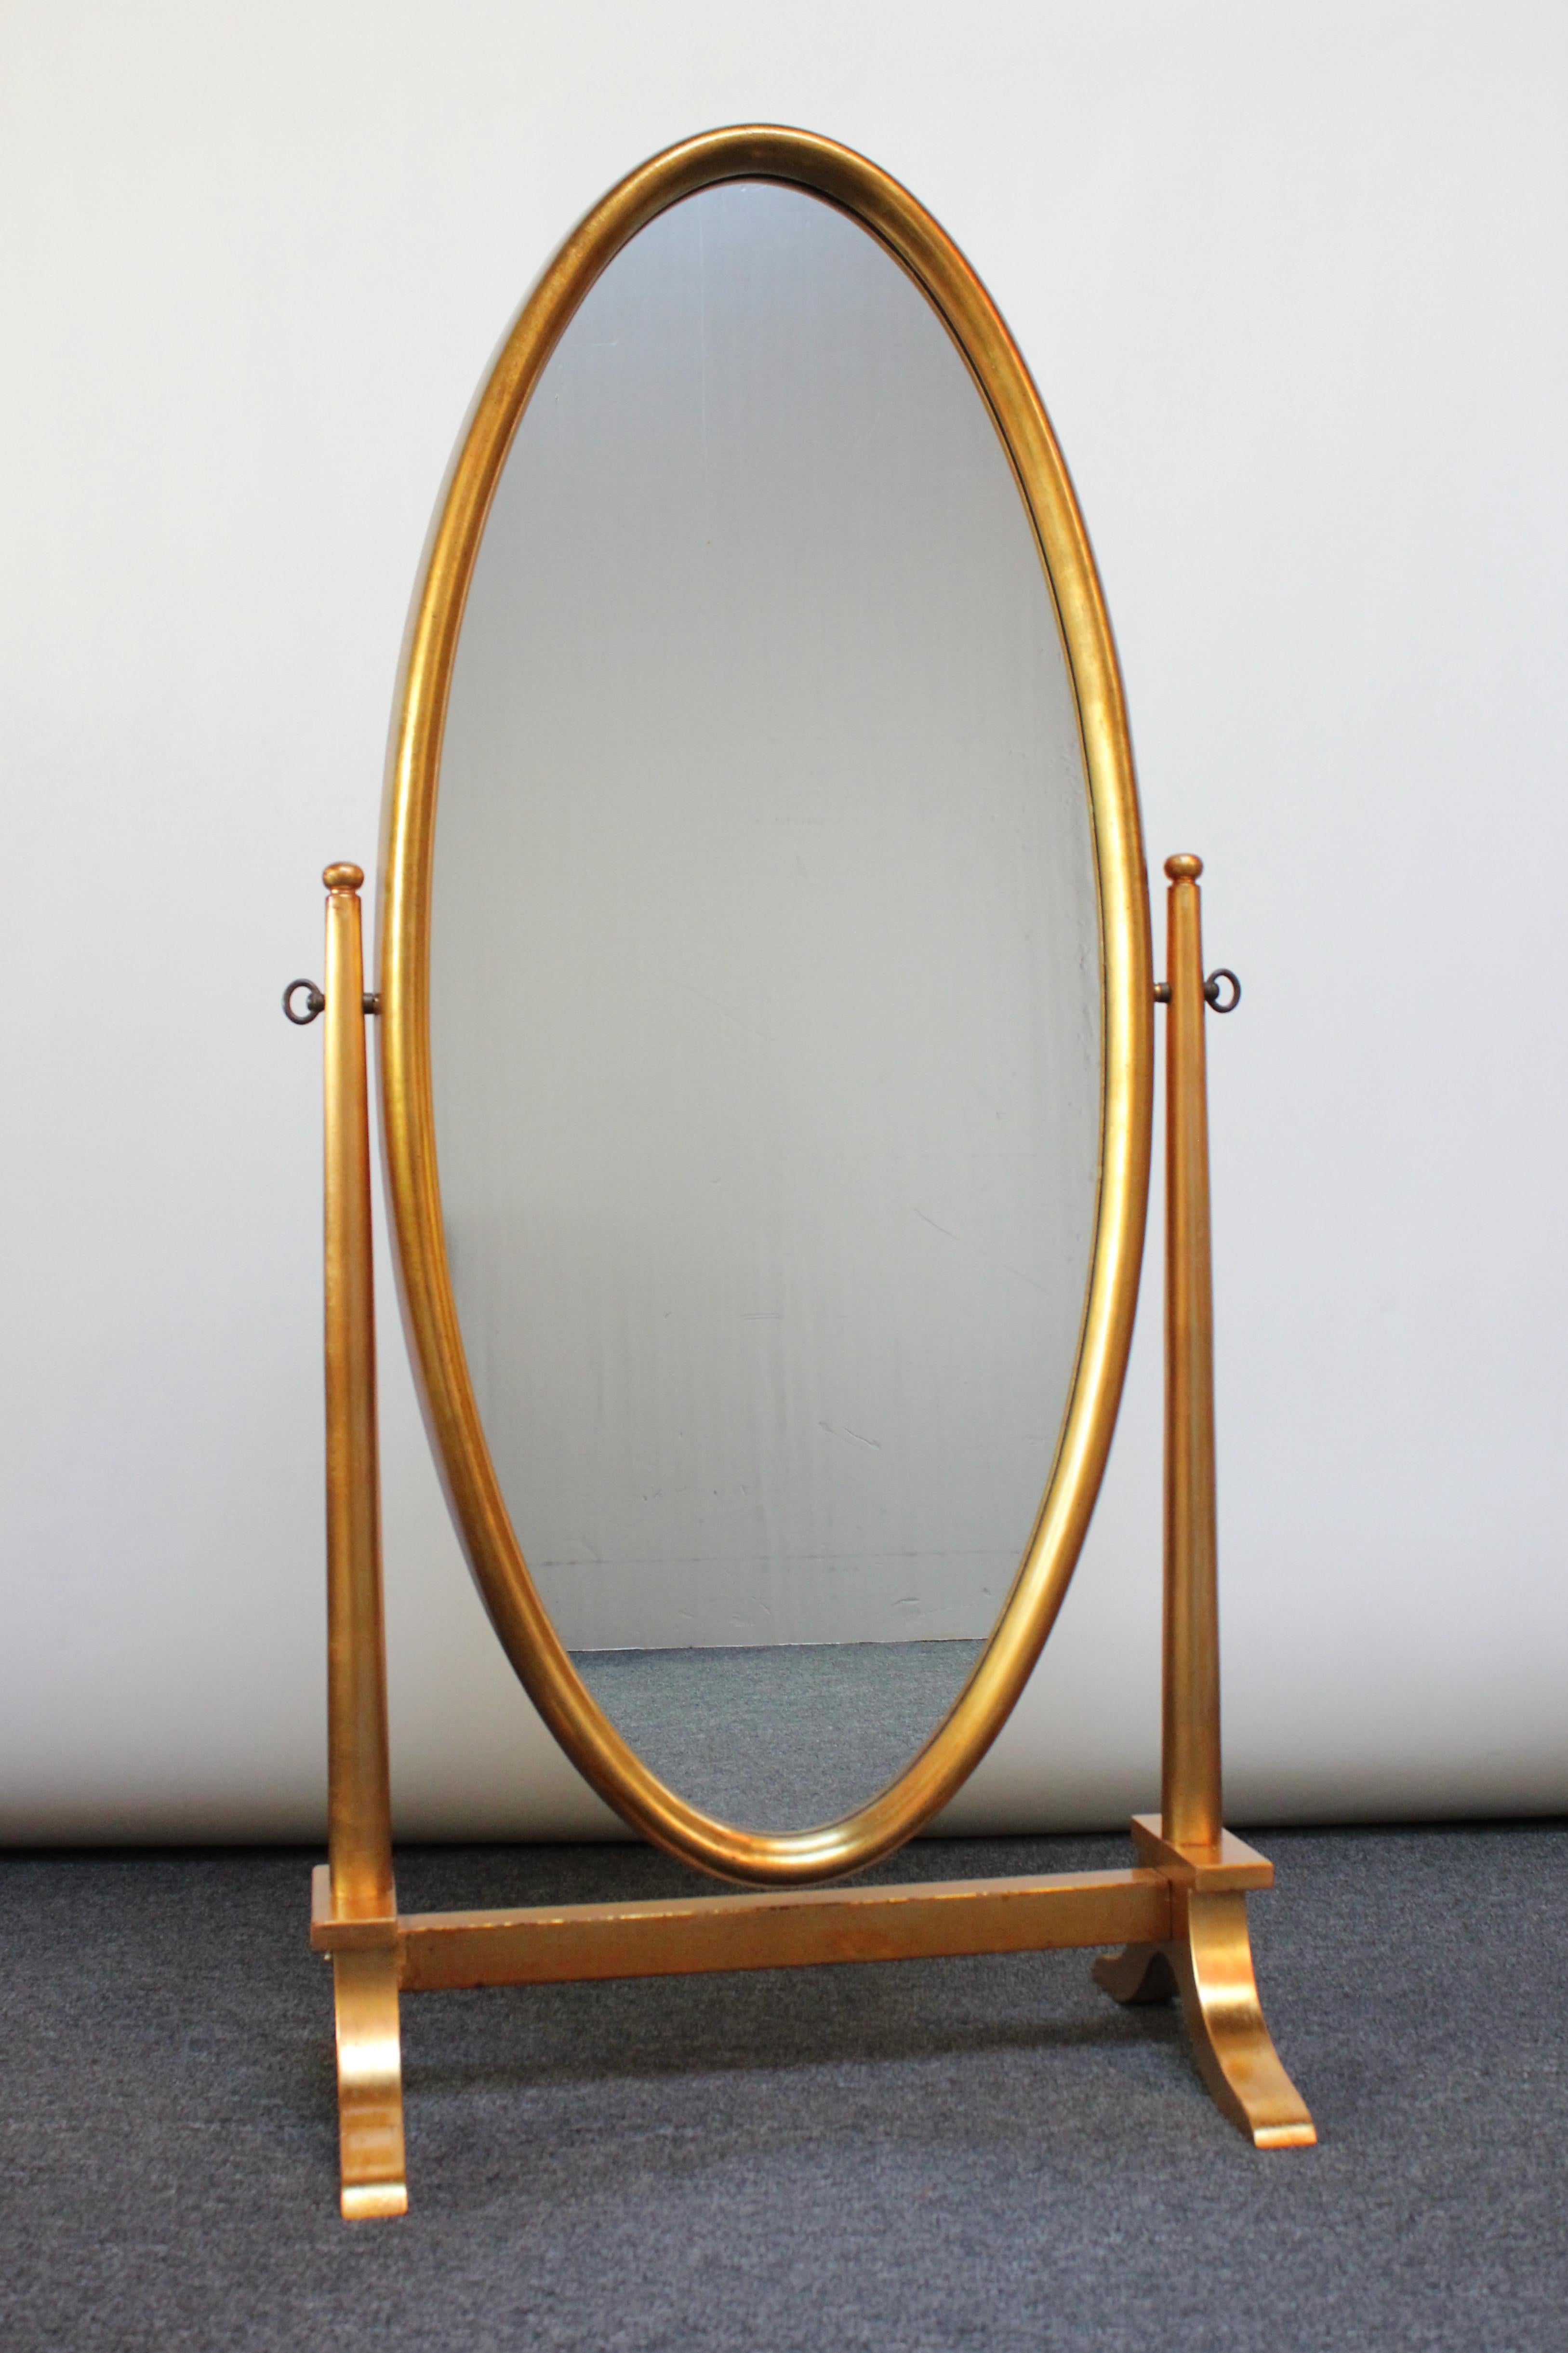 Labarge giltwood cheval floor mirror featuring oval inset glass within a deep, giltwood frame attached to a pedestal base. Mirror can be rotated anywhere along a 360 degree axis and held in place by tightening the keys on either side of the stand.